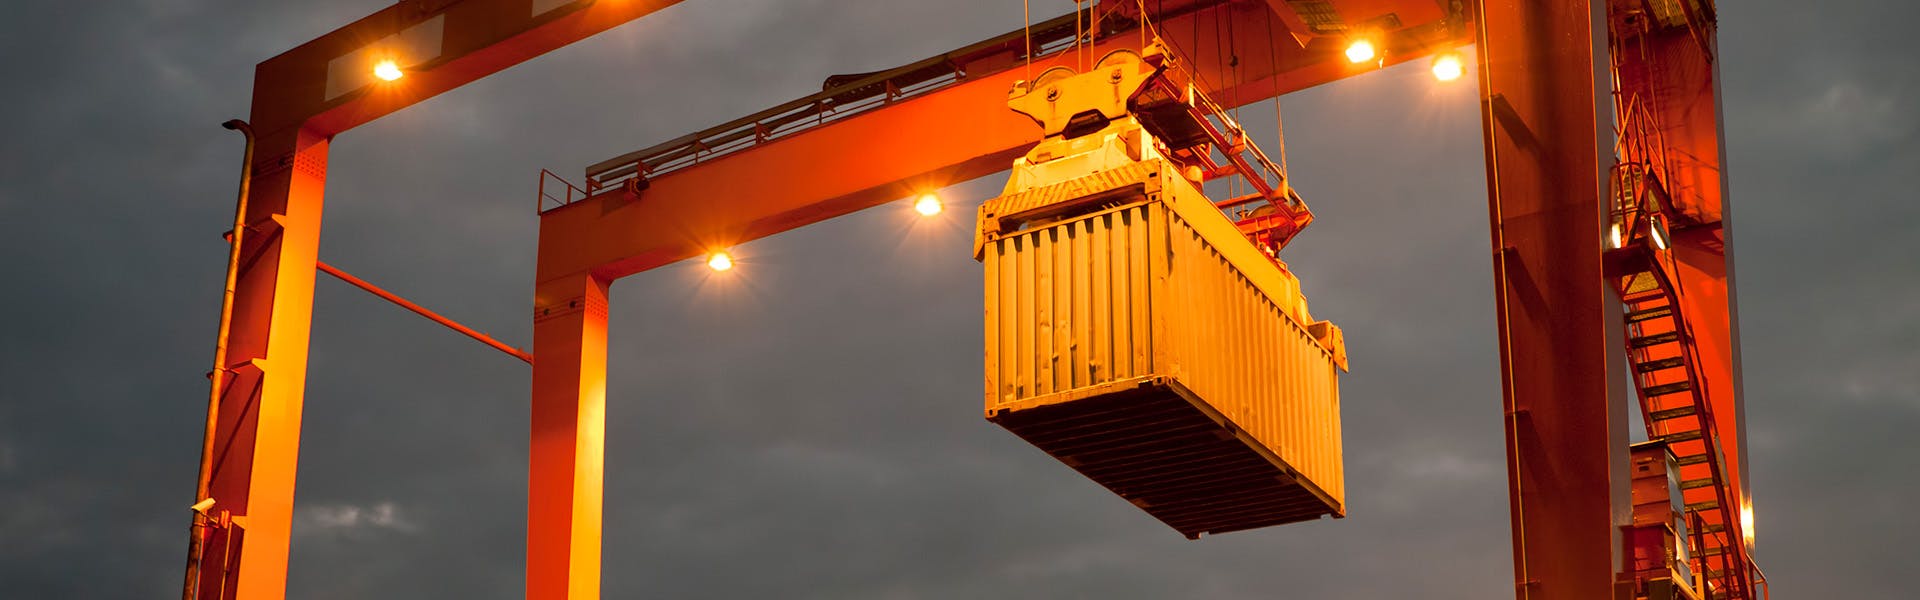 container hoisted crane night dock yard containerized shipping solutions